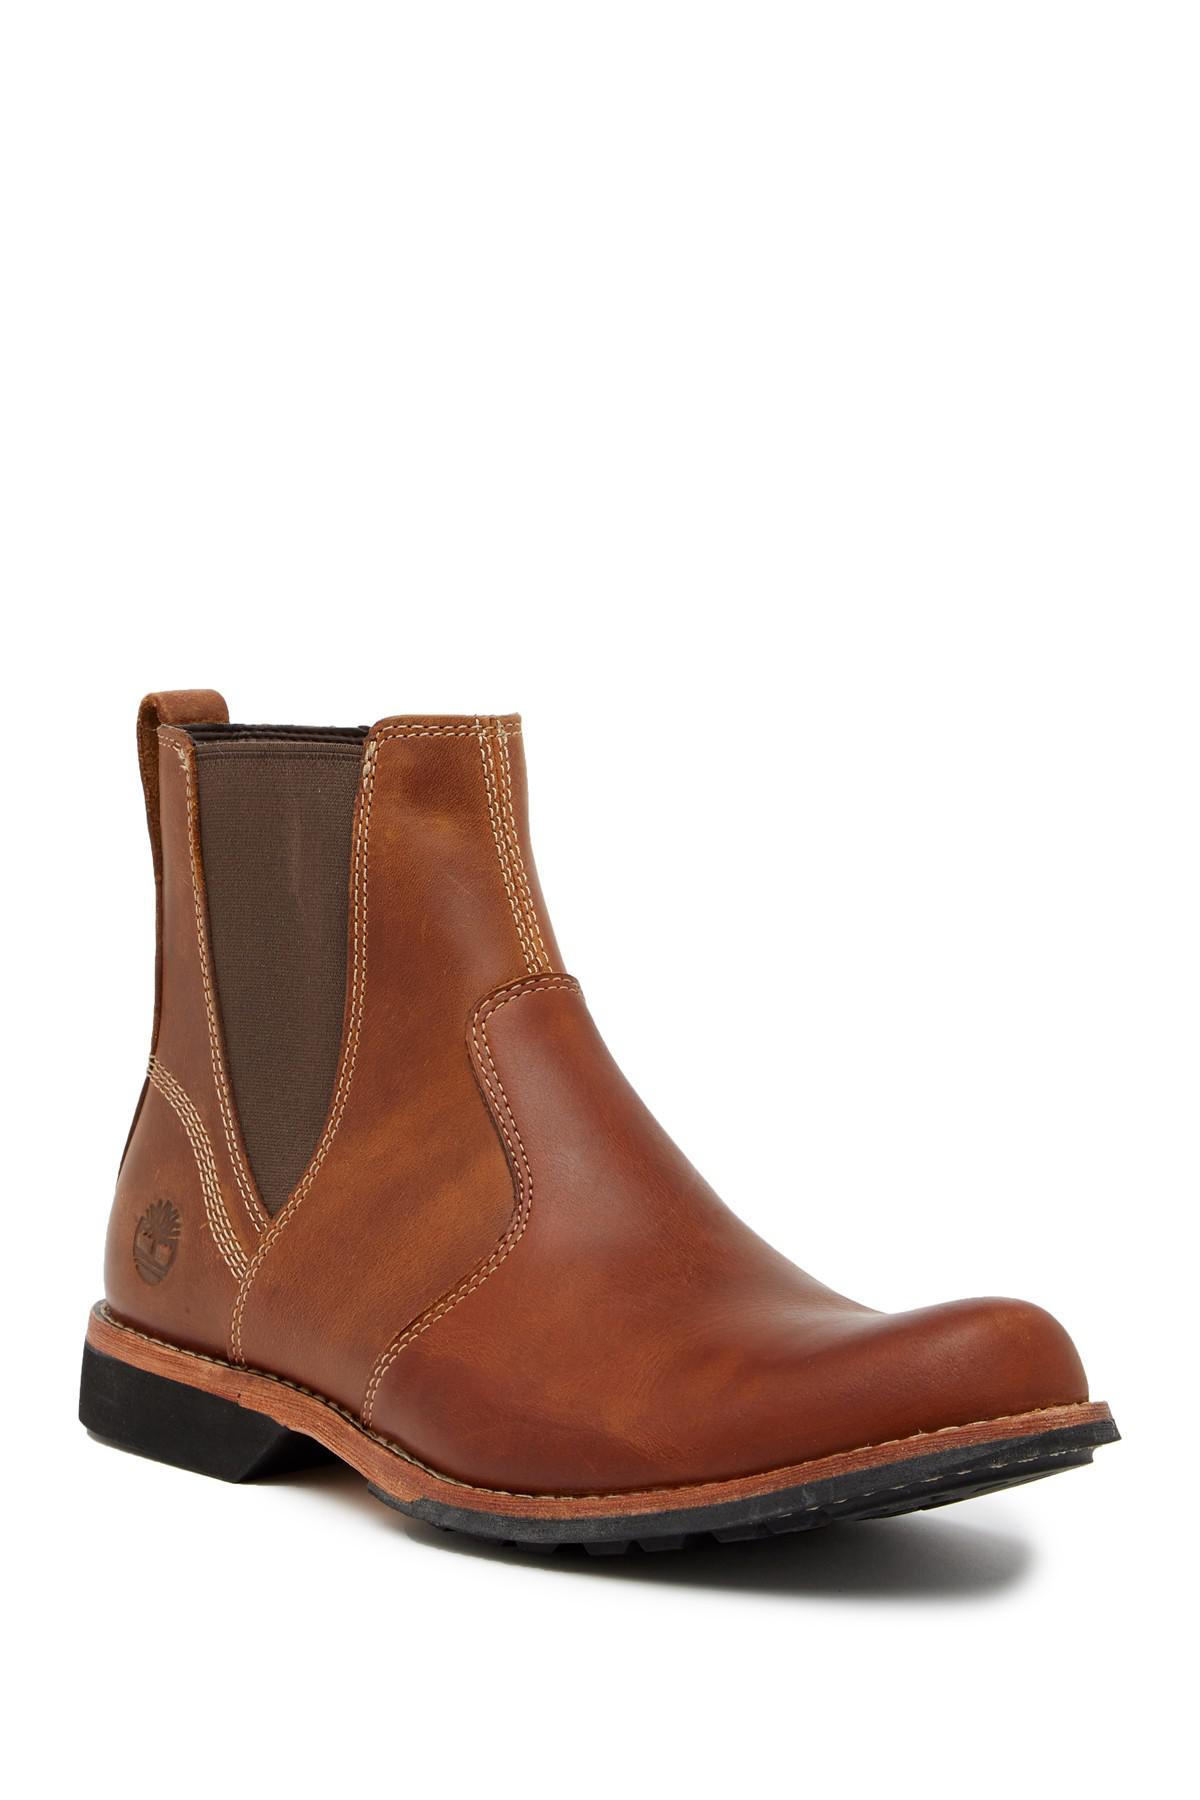 Timberland Casual Side Chelsea Boot Brown for Men | Lyst